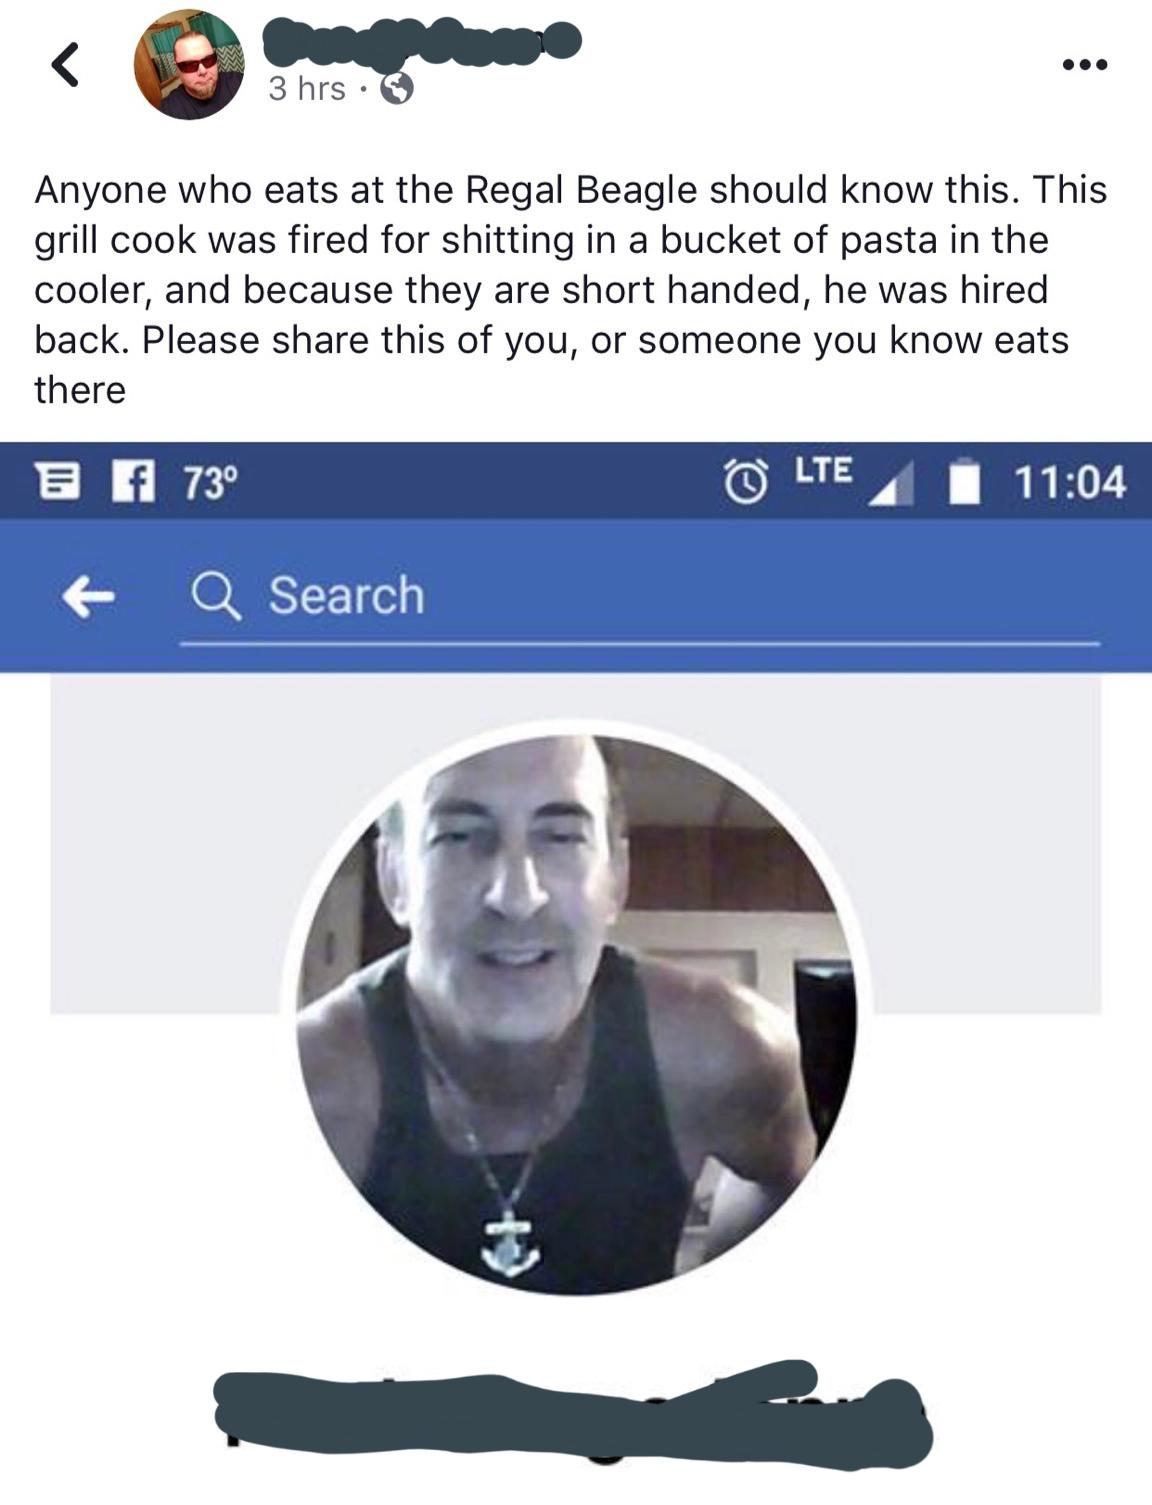 3 hrs Anyone who eats at the Regal Beagle should know this. This grill cook was fired for shitting in a bucket of pasta in the cooler, and because they are short handed, he was hired back. Please this of you, or someone you know eats there